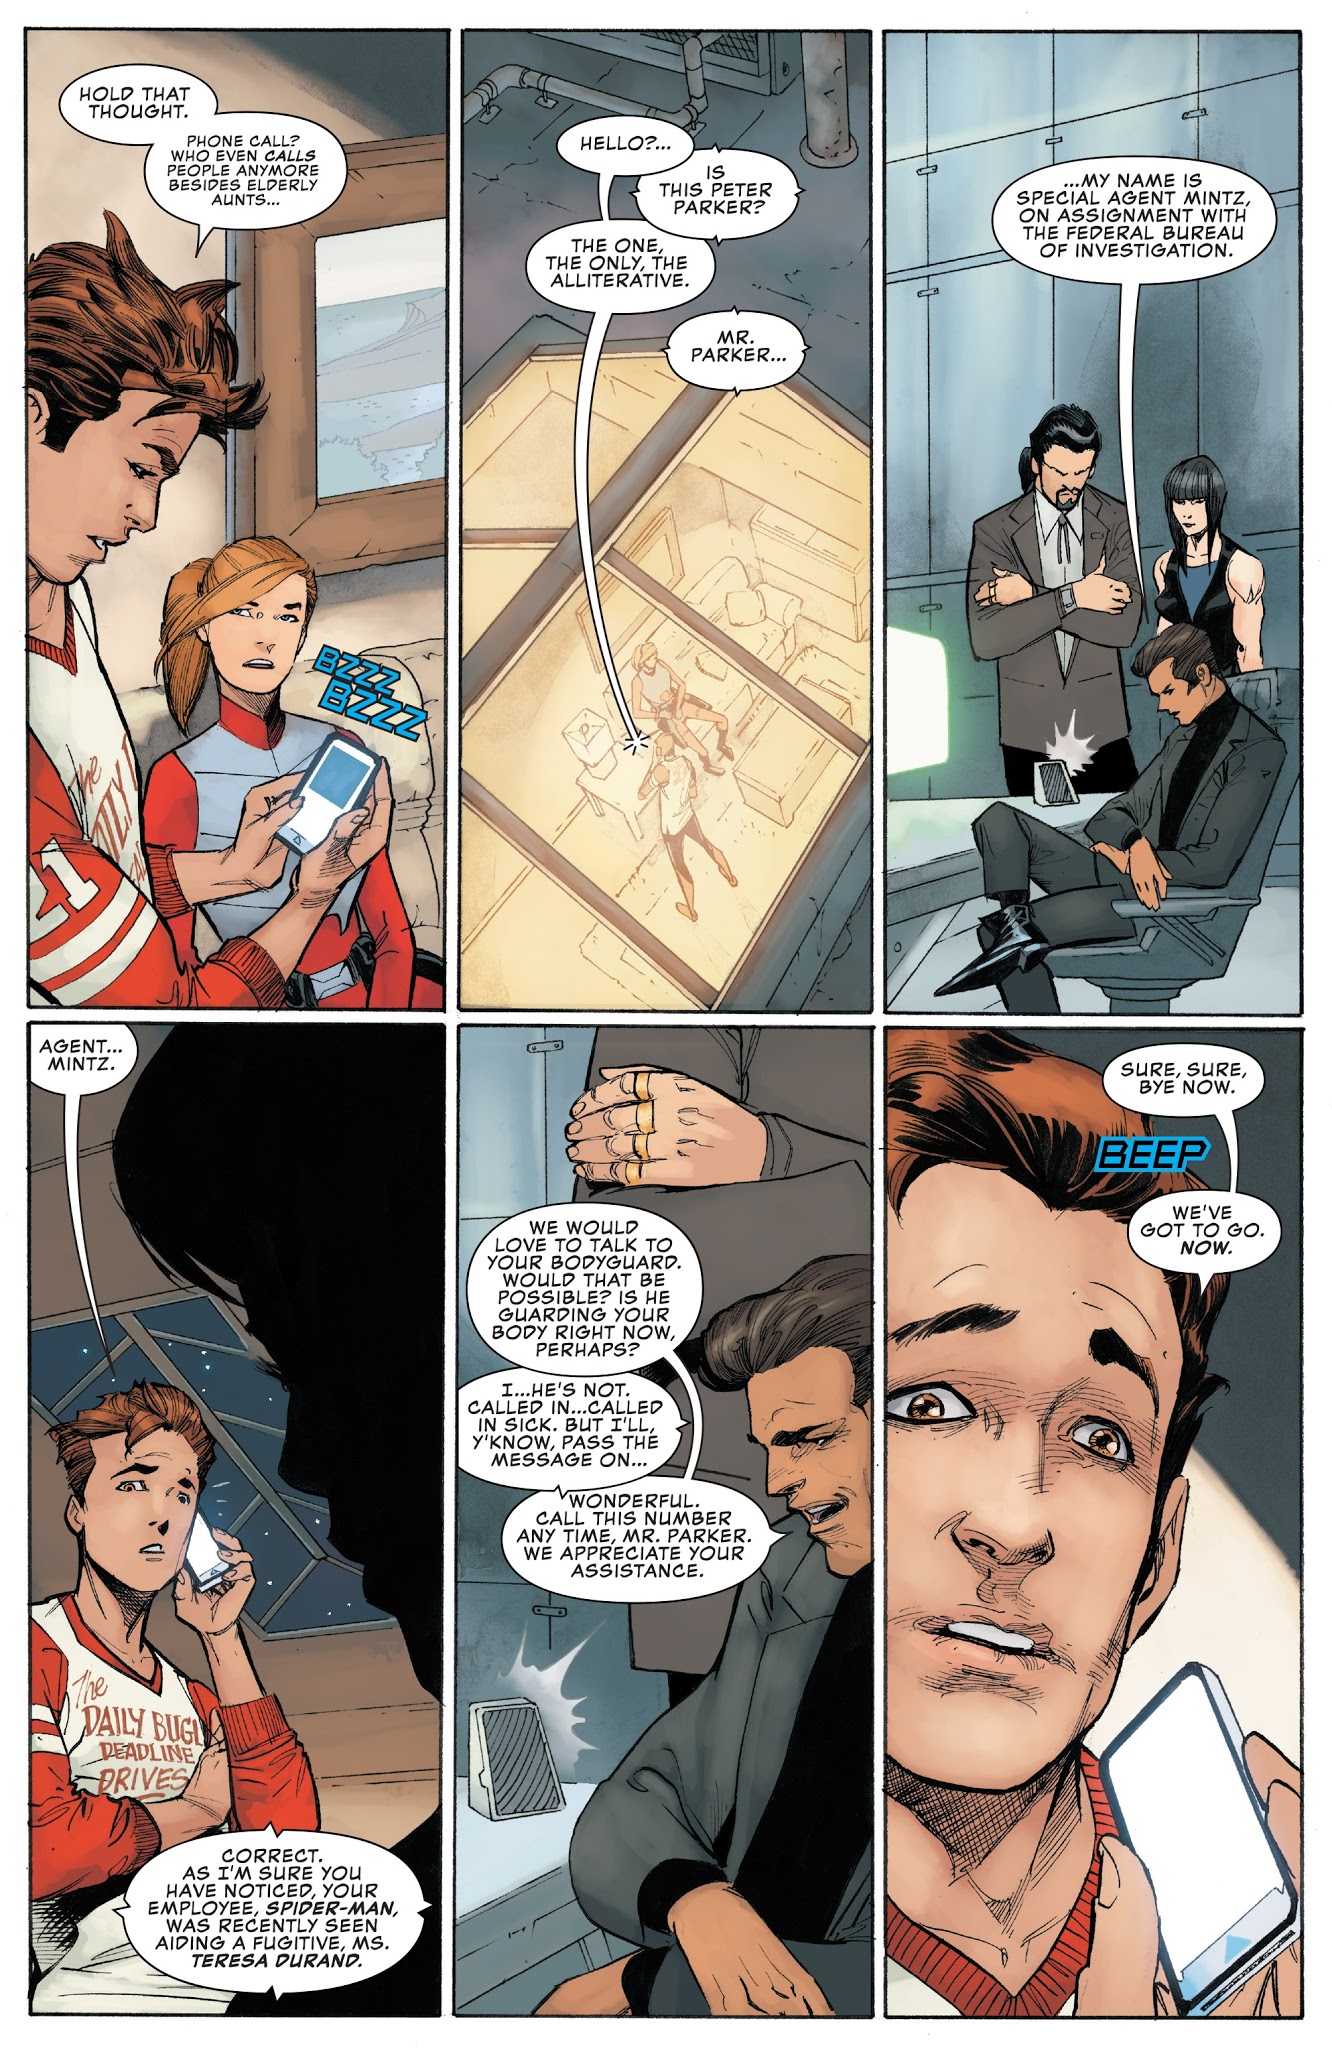 Read online Peter Parker: The Spectacular Spider-Man comic -  Issue #4 - 13